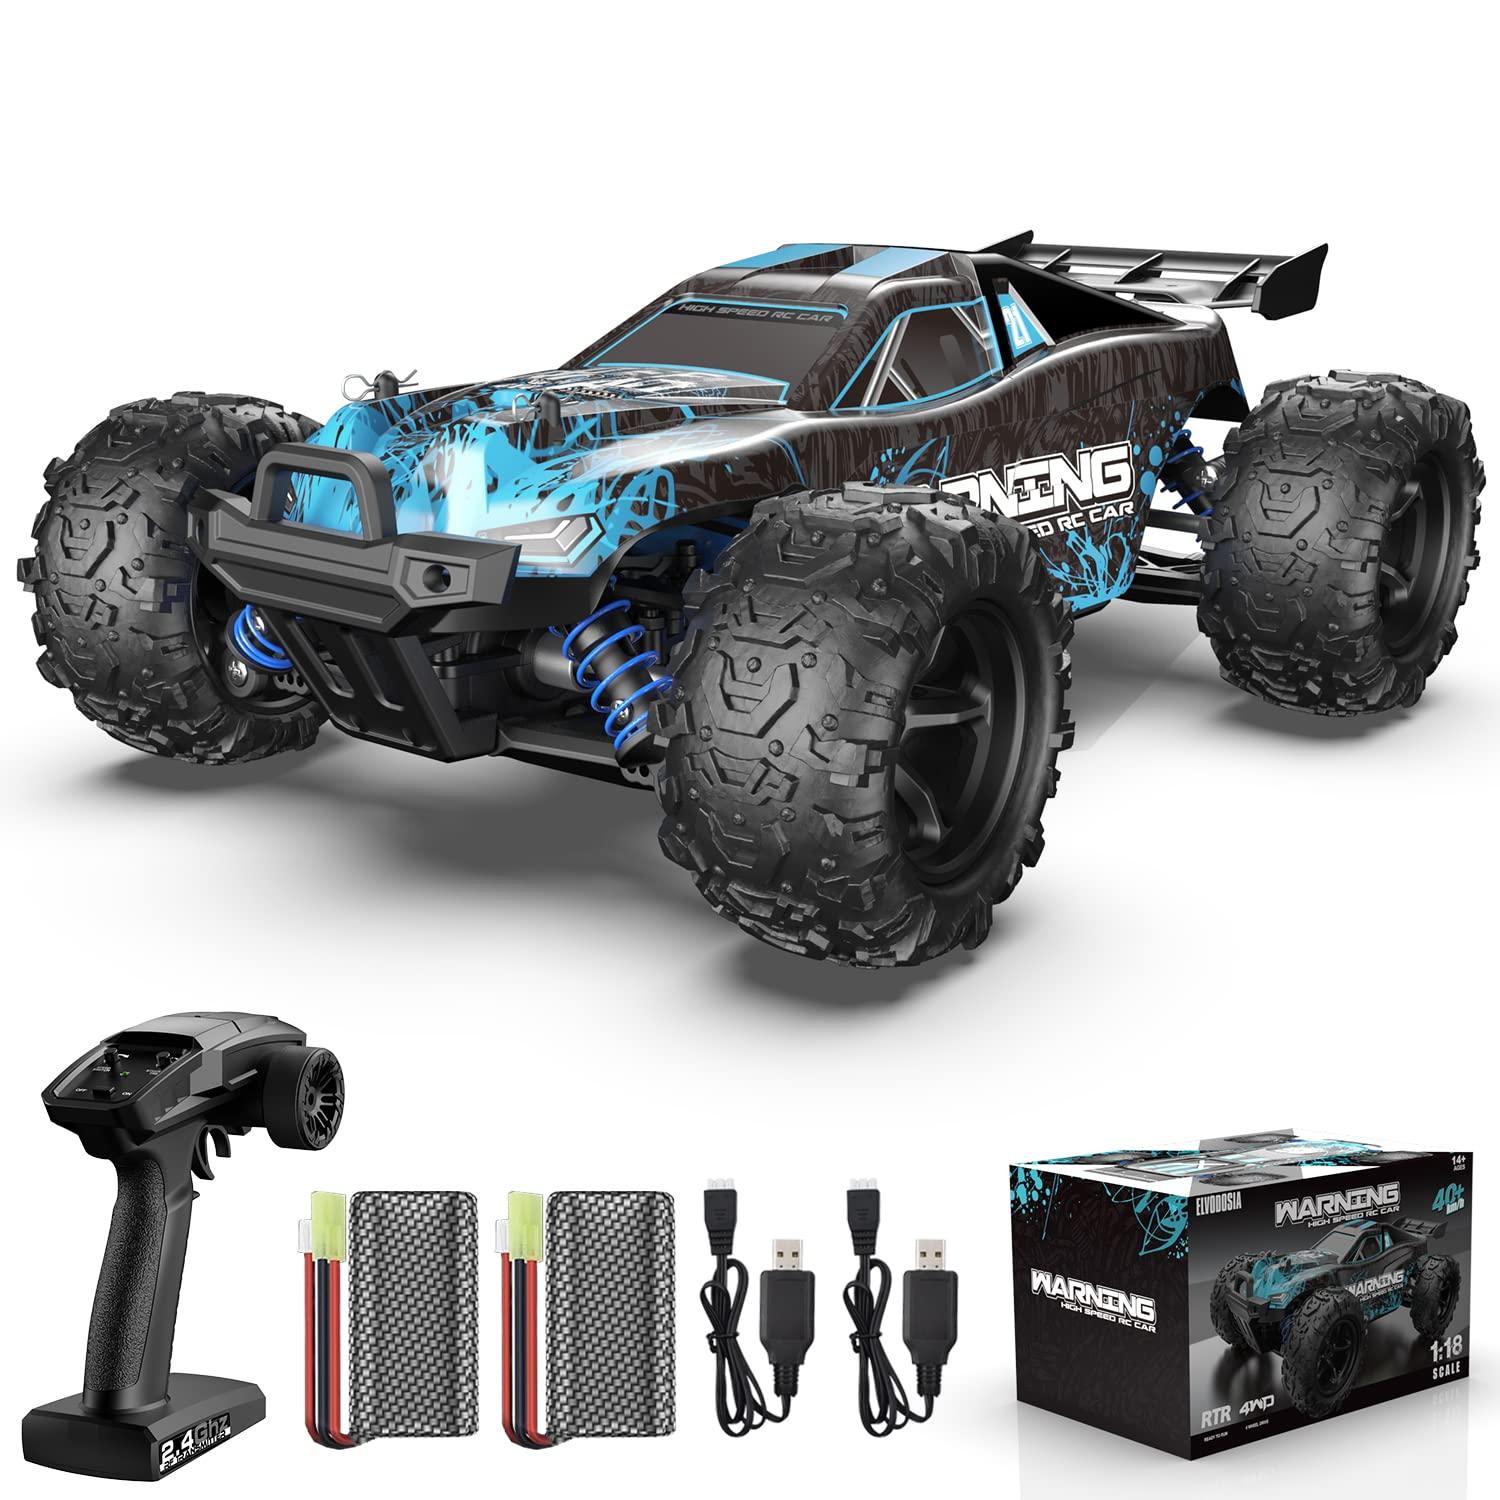 4Wd Rc: Key Features to Consider for Your 4wd RC Car